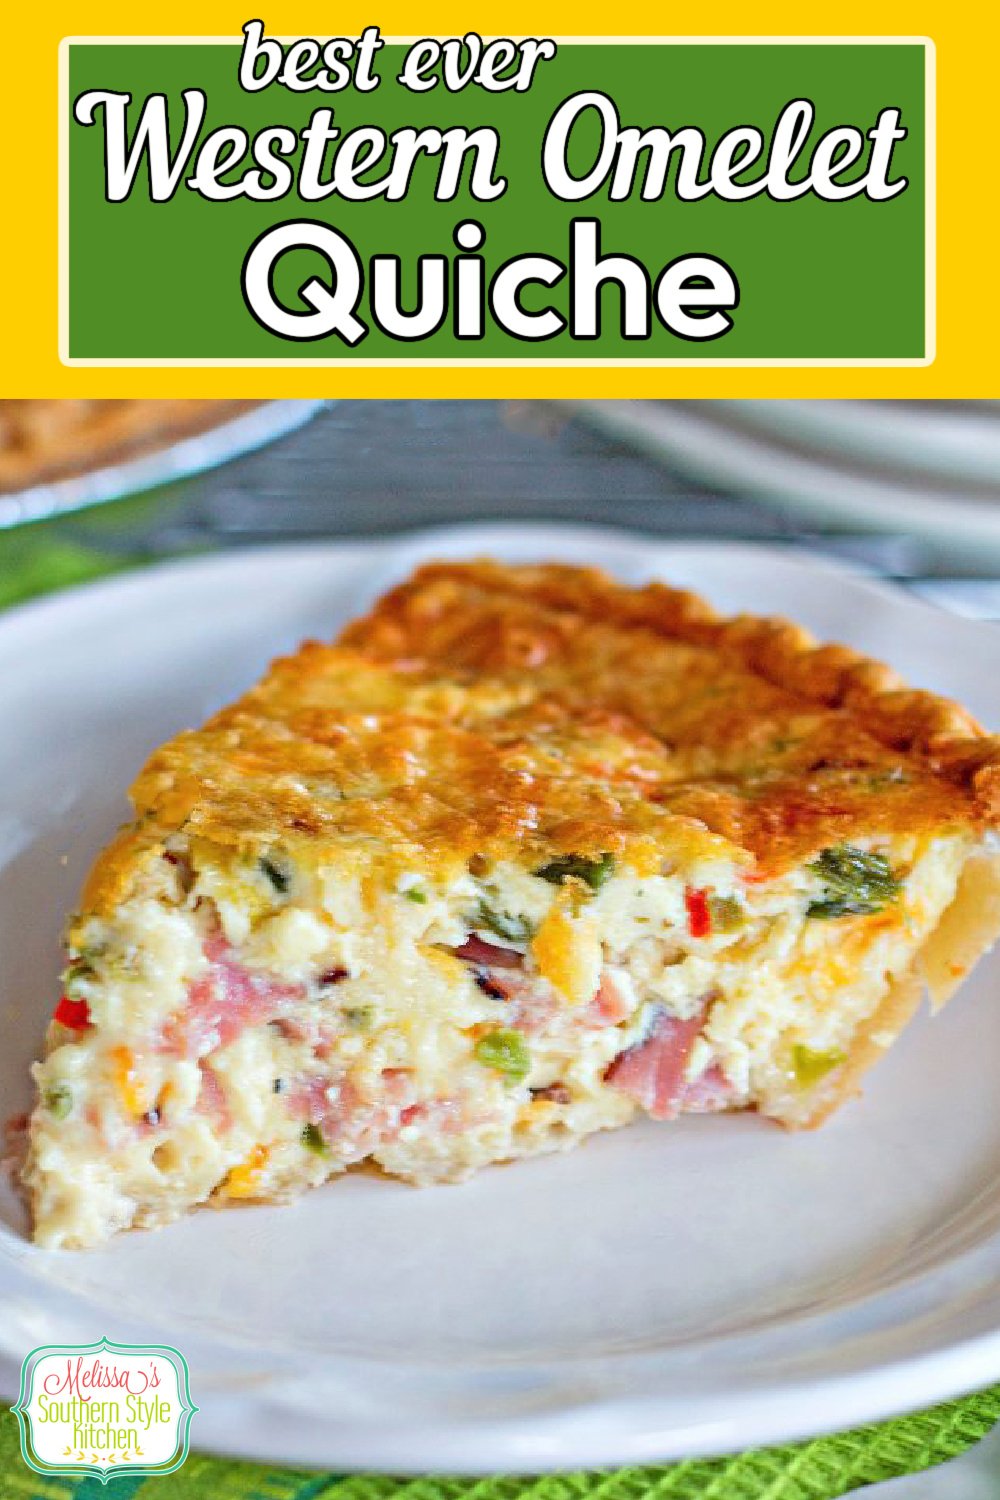 This Western Omelet Quiche can be served for breakfast, brunch, lunch or dinner #westernomeletquiche #westernomelet #quicherecipes #bestquicherecipes #omelets #eggs #holidaybrunch #holidays #dinner #dinnerideas #leftoverhamrecipes #southernfood #southernrecipes